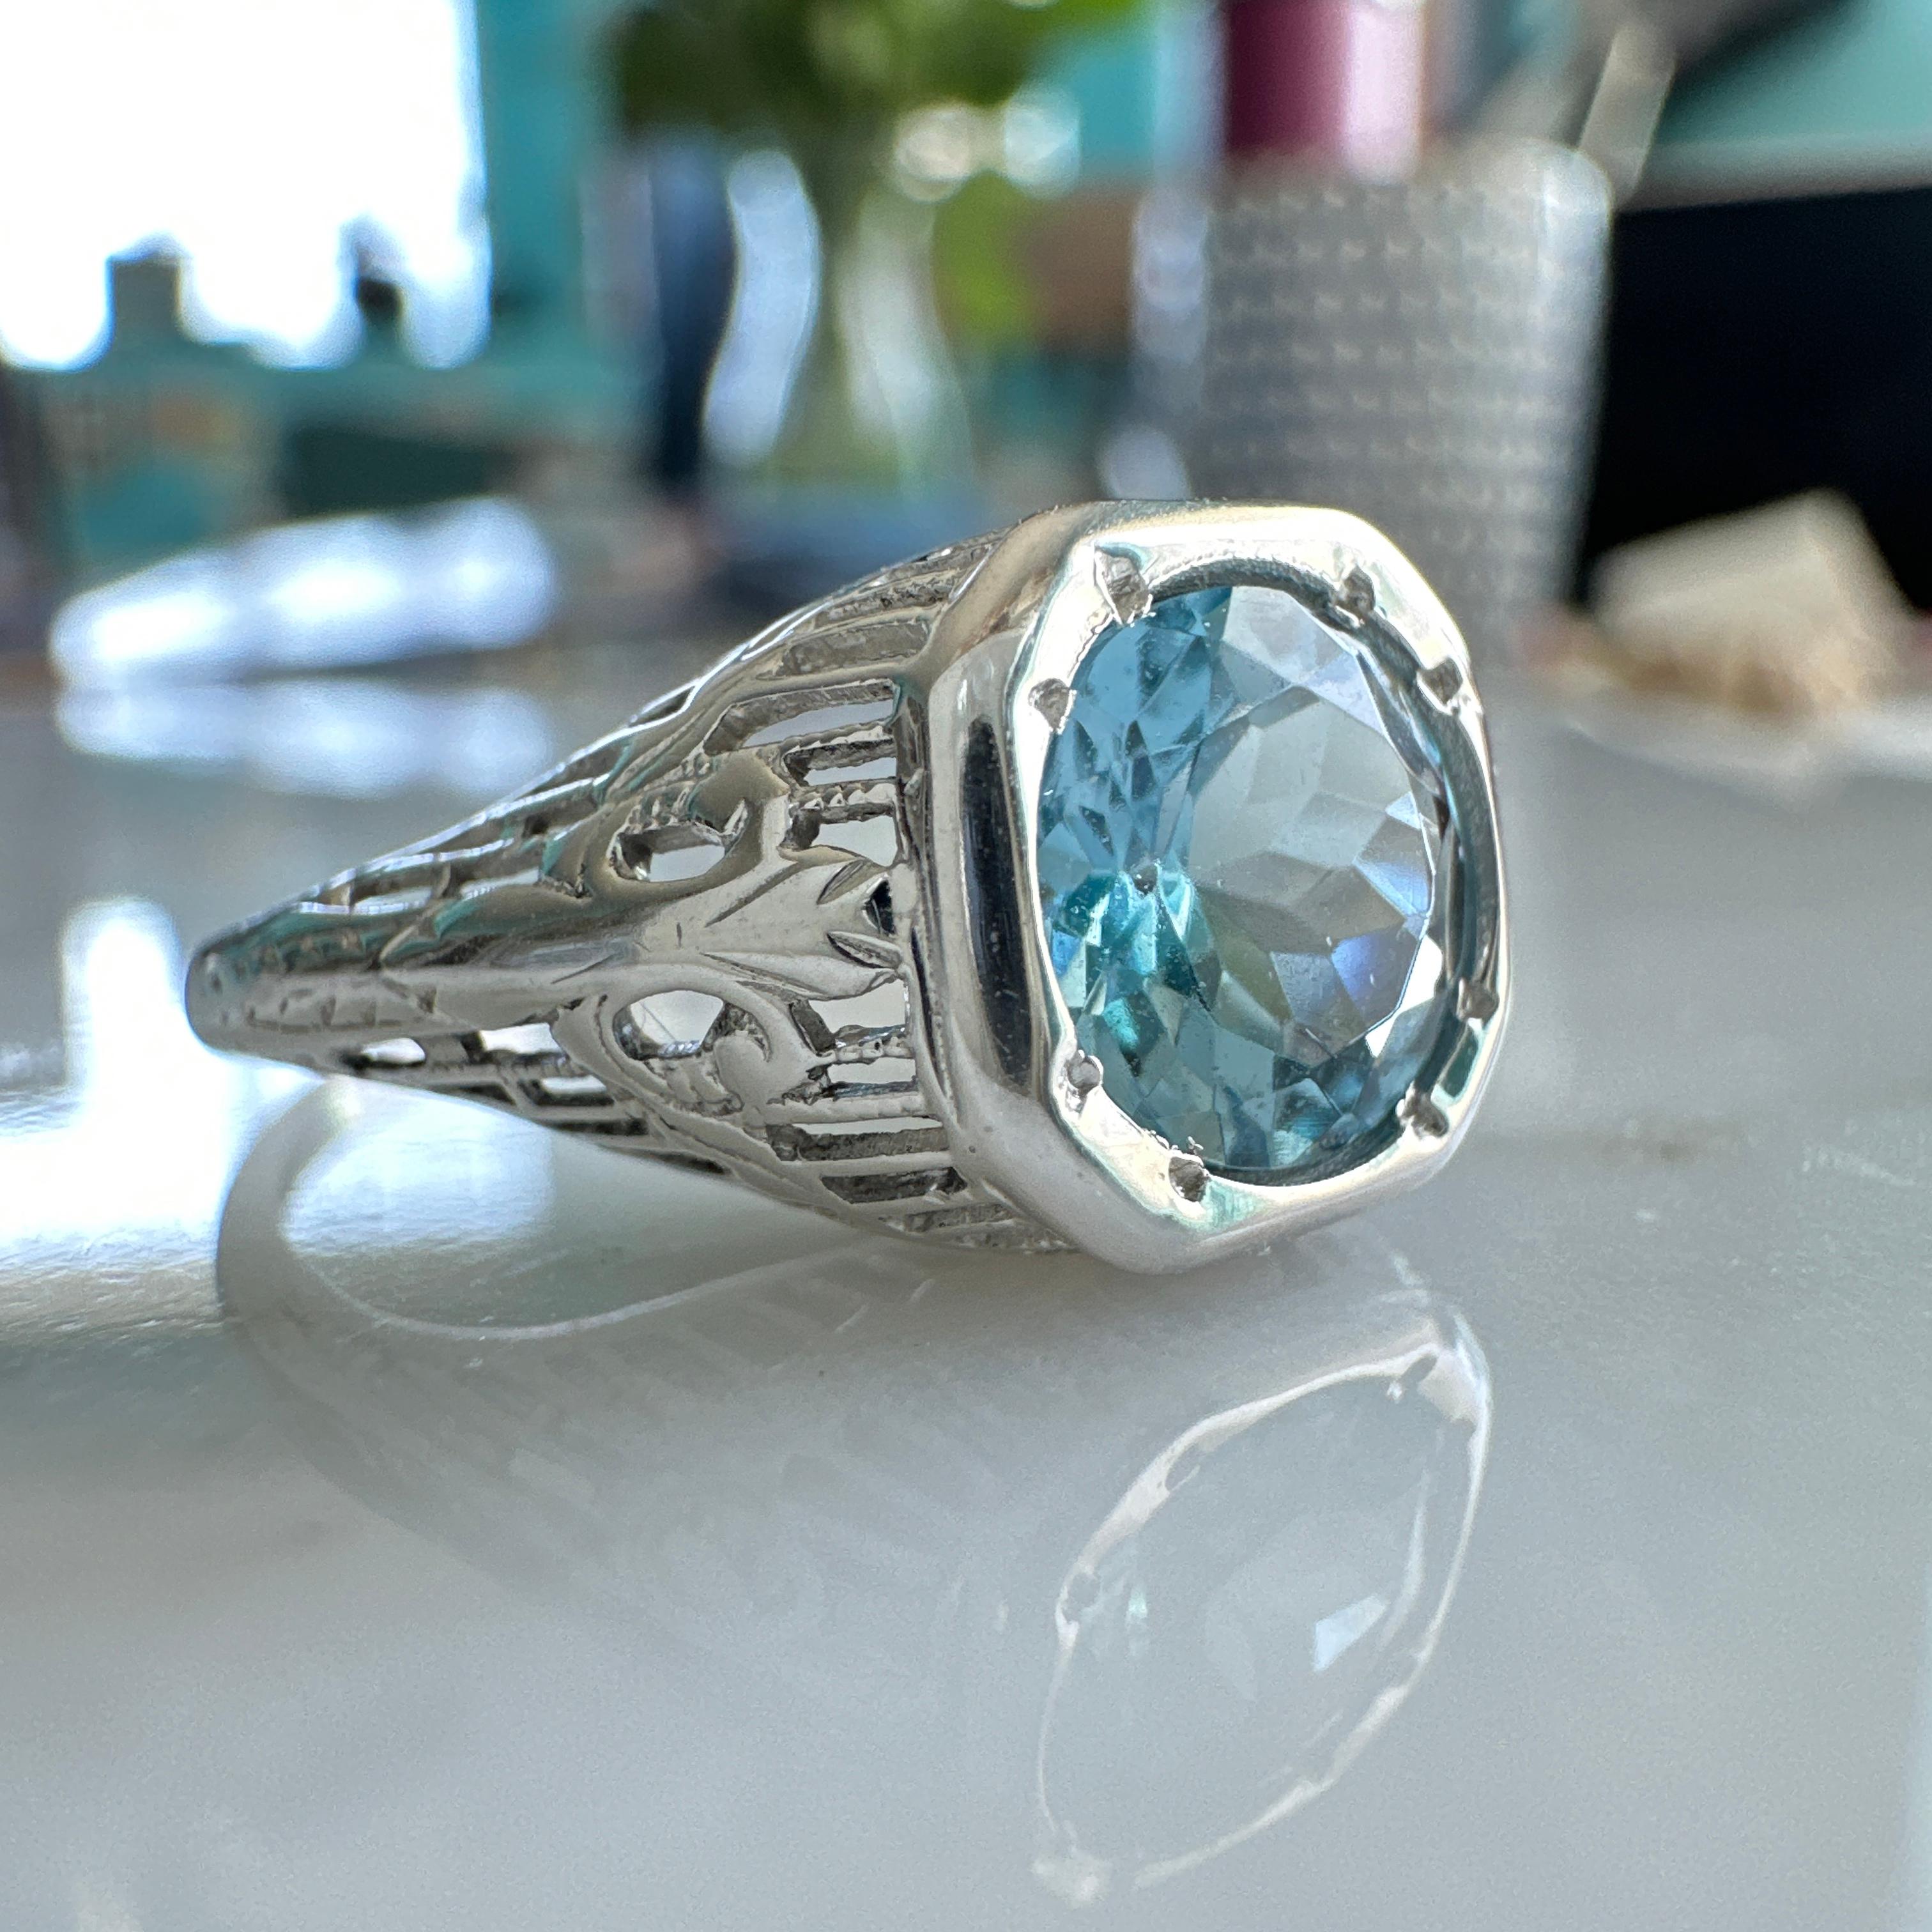 Details: 
Beautiful Edwardian Aquamarine 18K white gold filigree ring. This ring is very sweet, with delicately detailed filigree with tiny French fleur-de-lis. The aquamarine stone is light in color, but not super pale with a beautiful blue with a